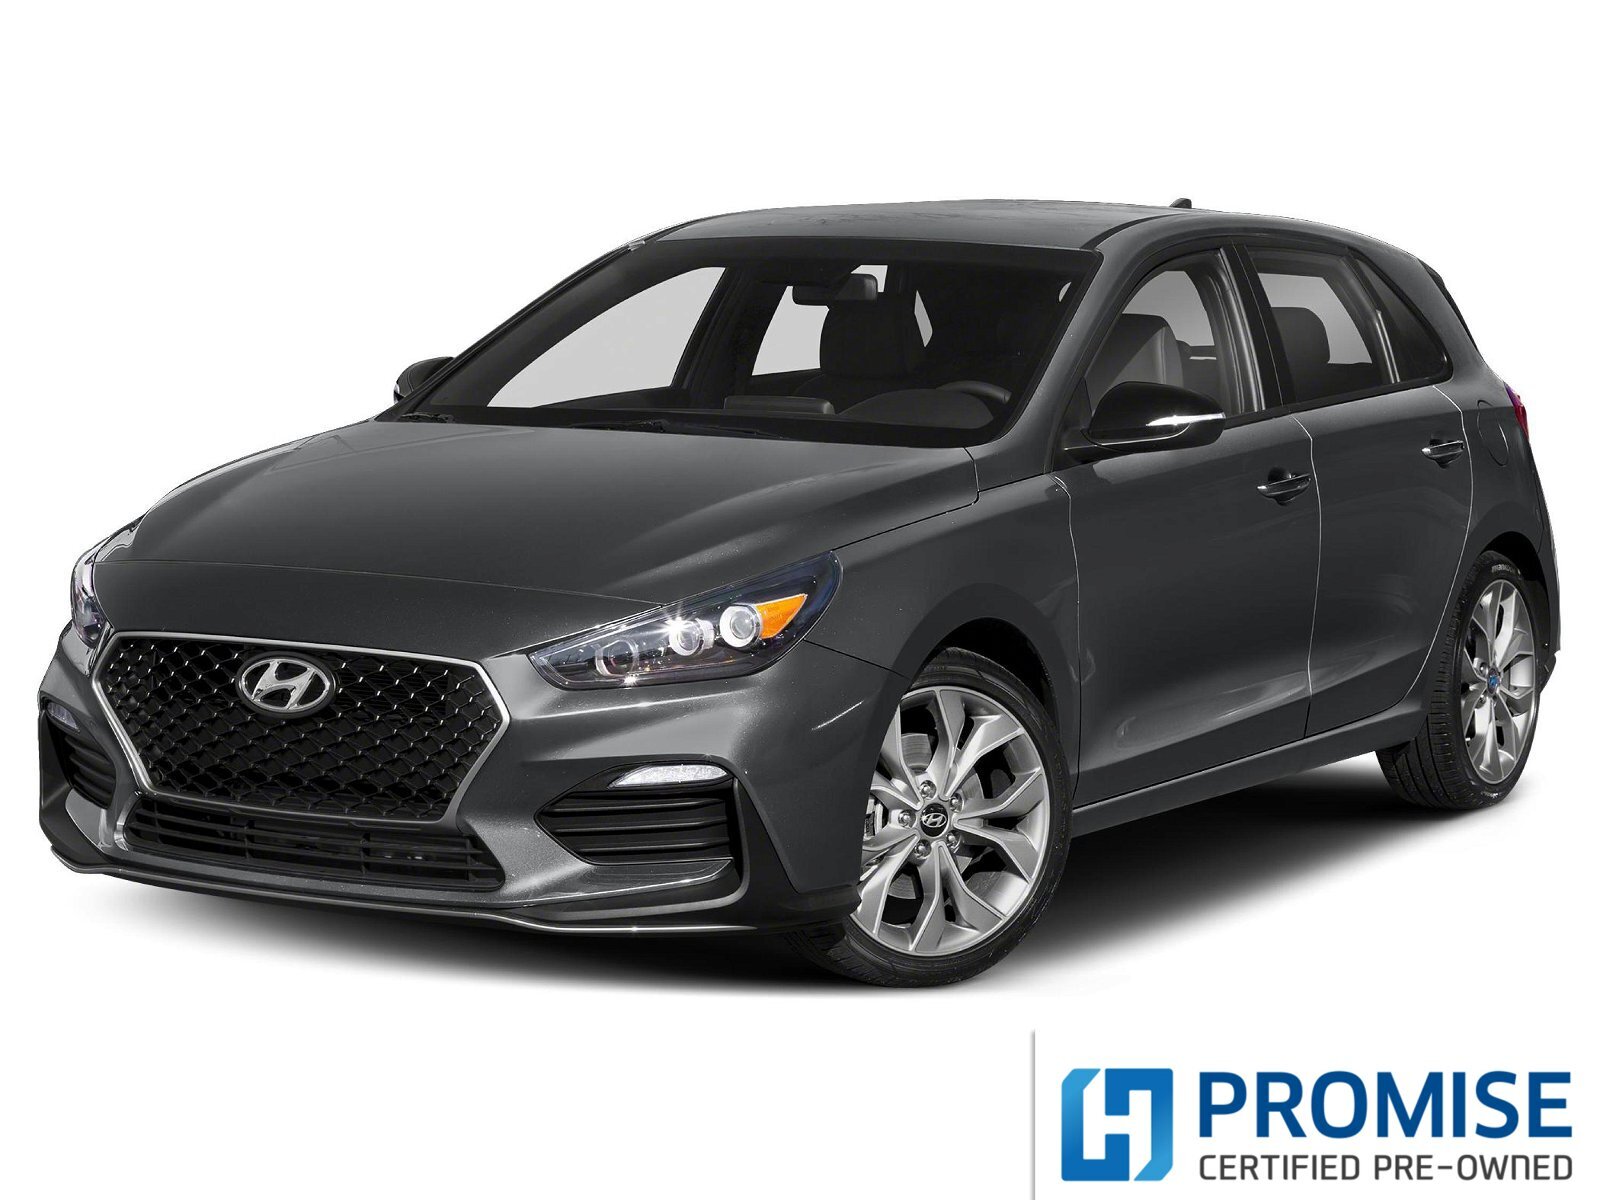 2020 Hyundai Elantra GT N Line Ultimate Certified | 5.99% Available